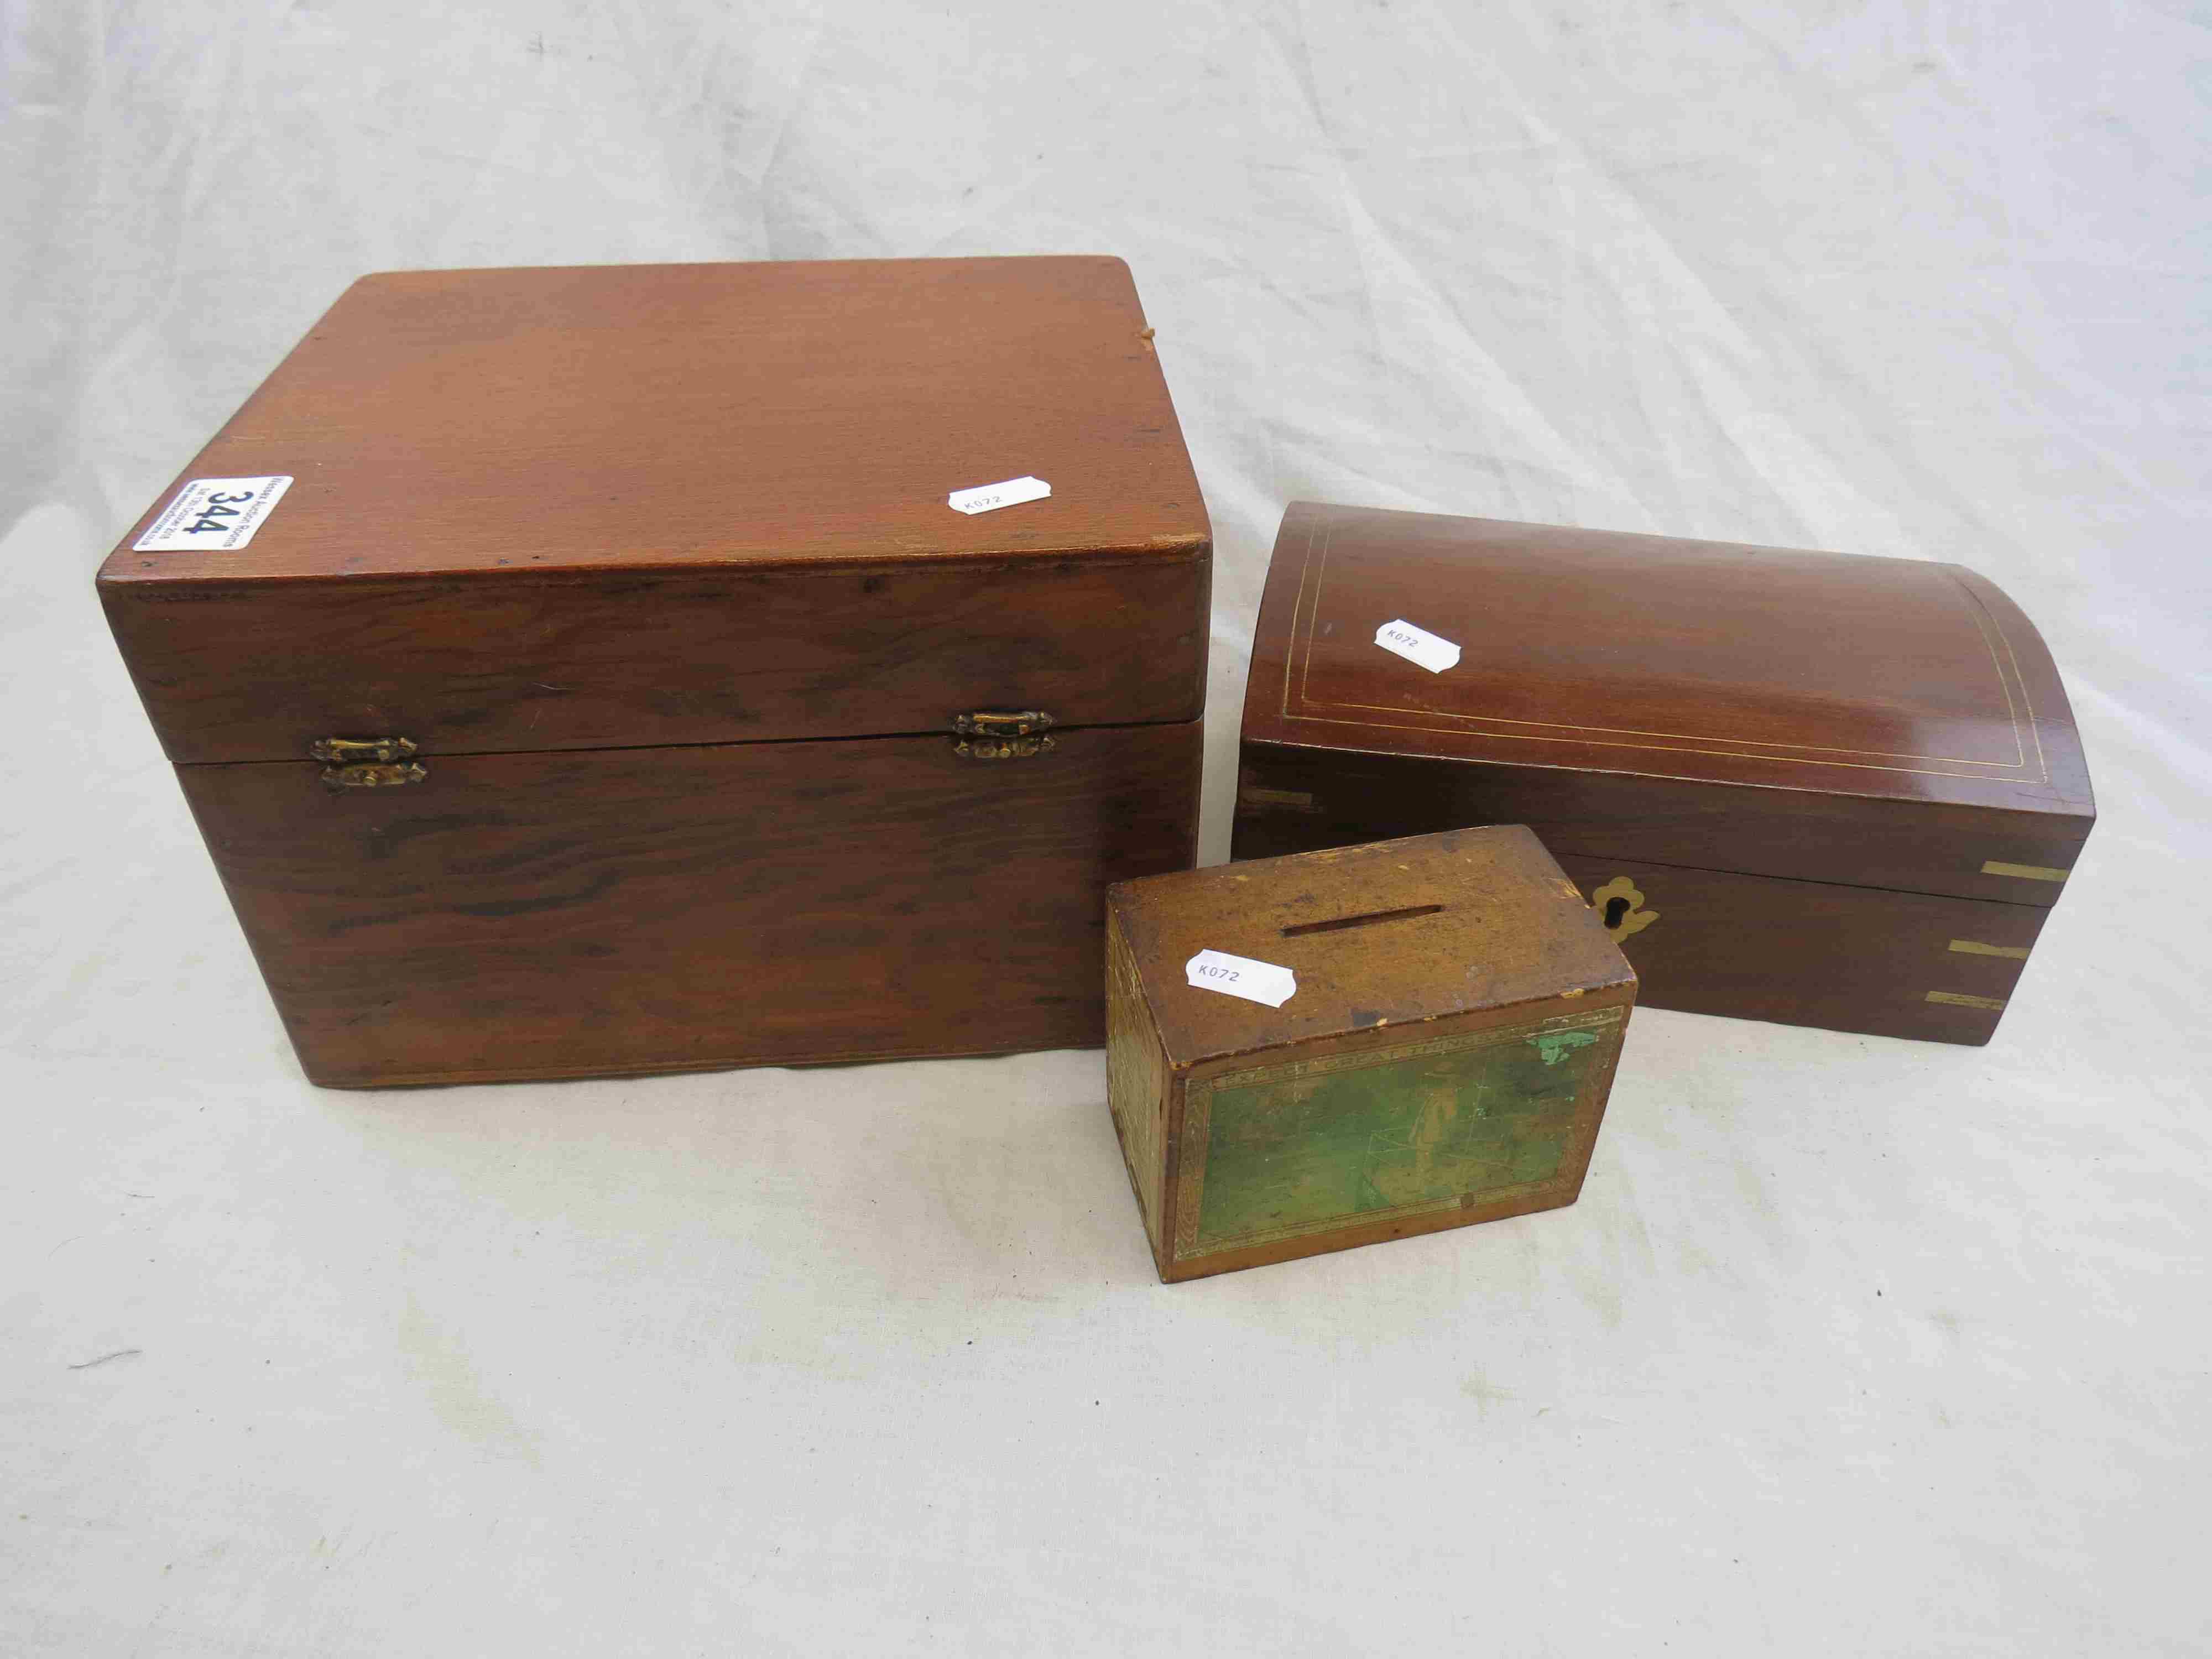 Wooden Church Funds money box, a wooden jewellery box together with a larger wooden box and two